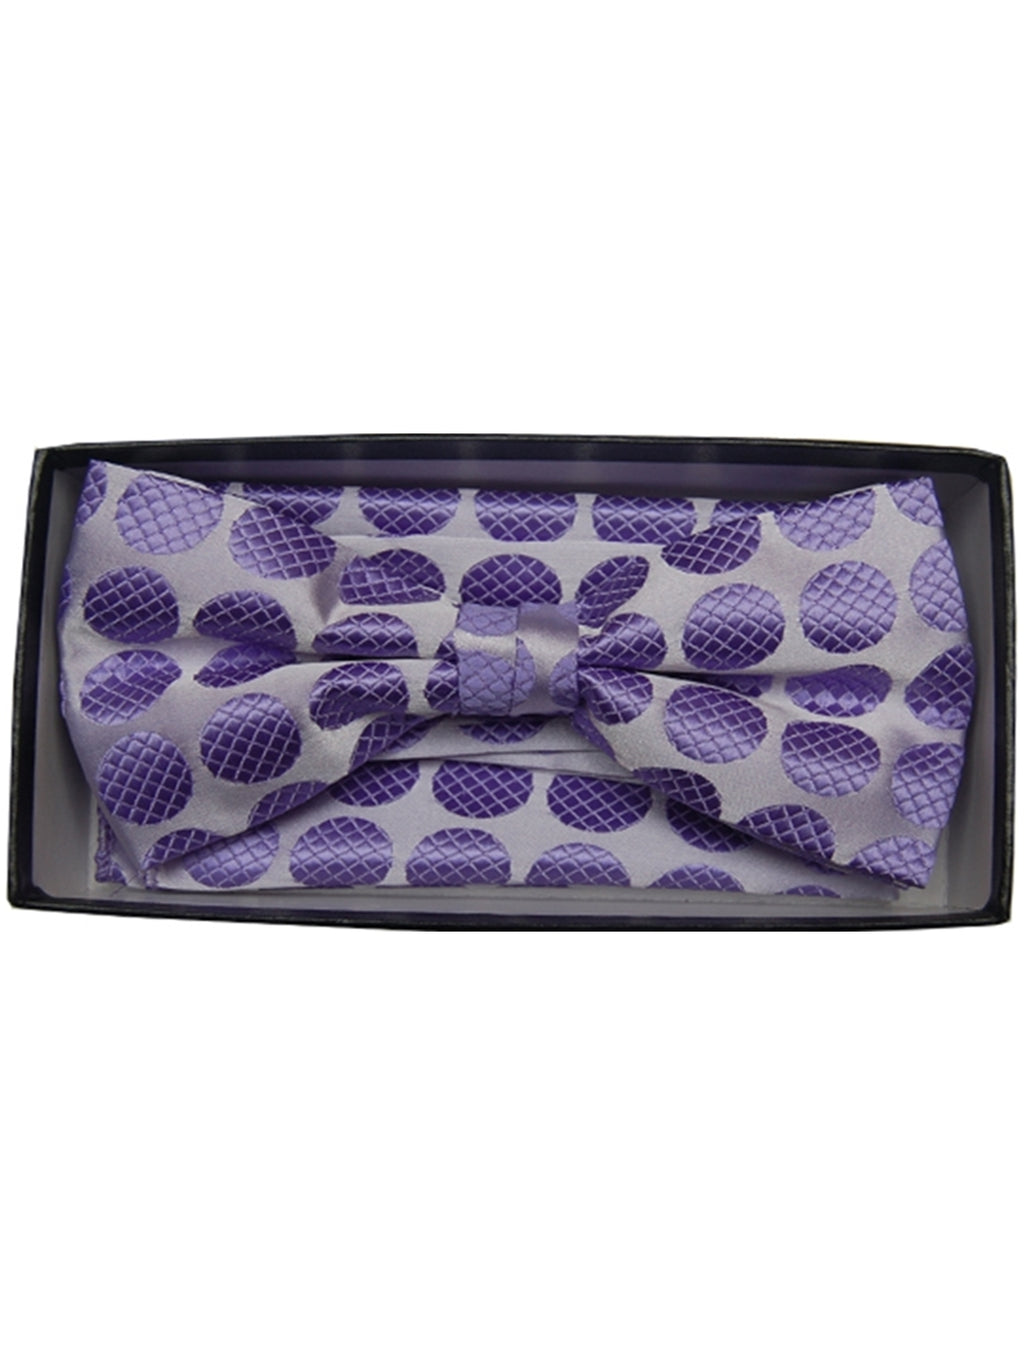 Men's Purple Pre-Tied Bow Tie With Matching Hanky BH-1663 Bow Tie TheDapperTie Purple Regular 